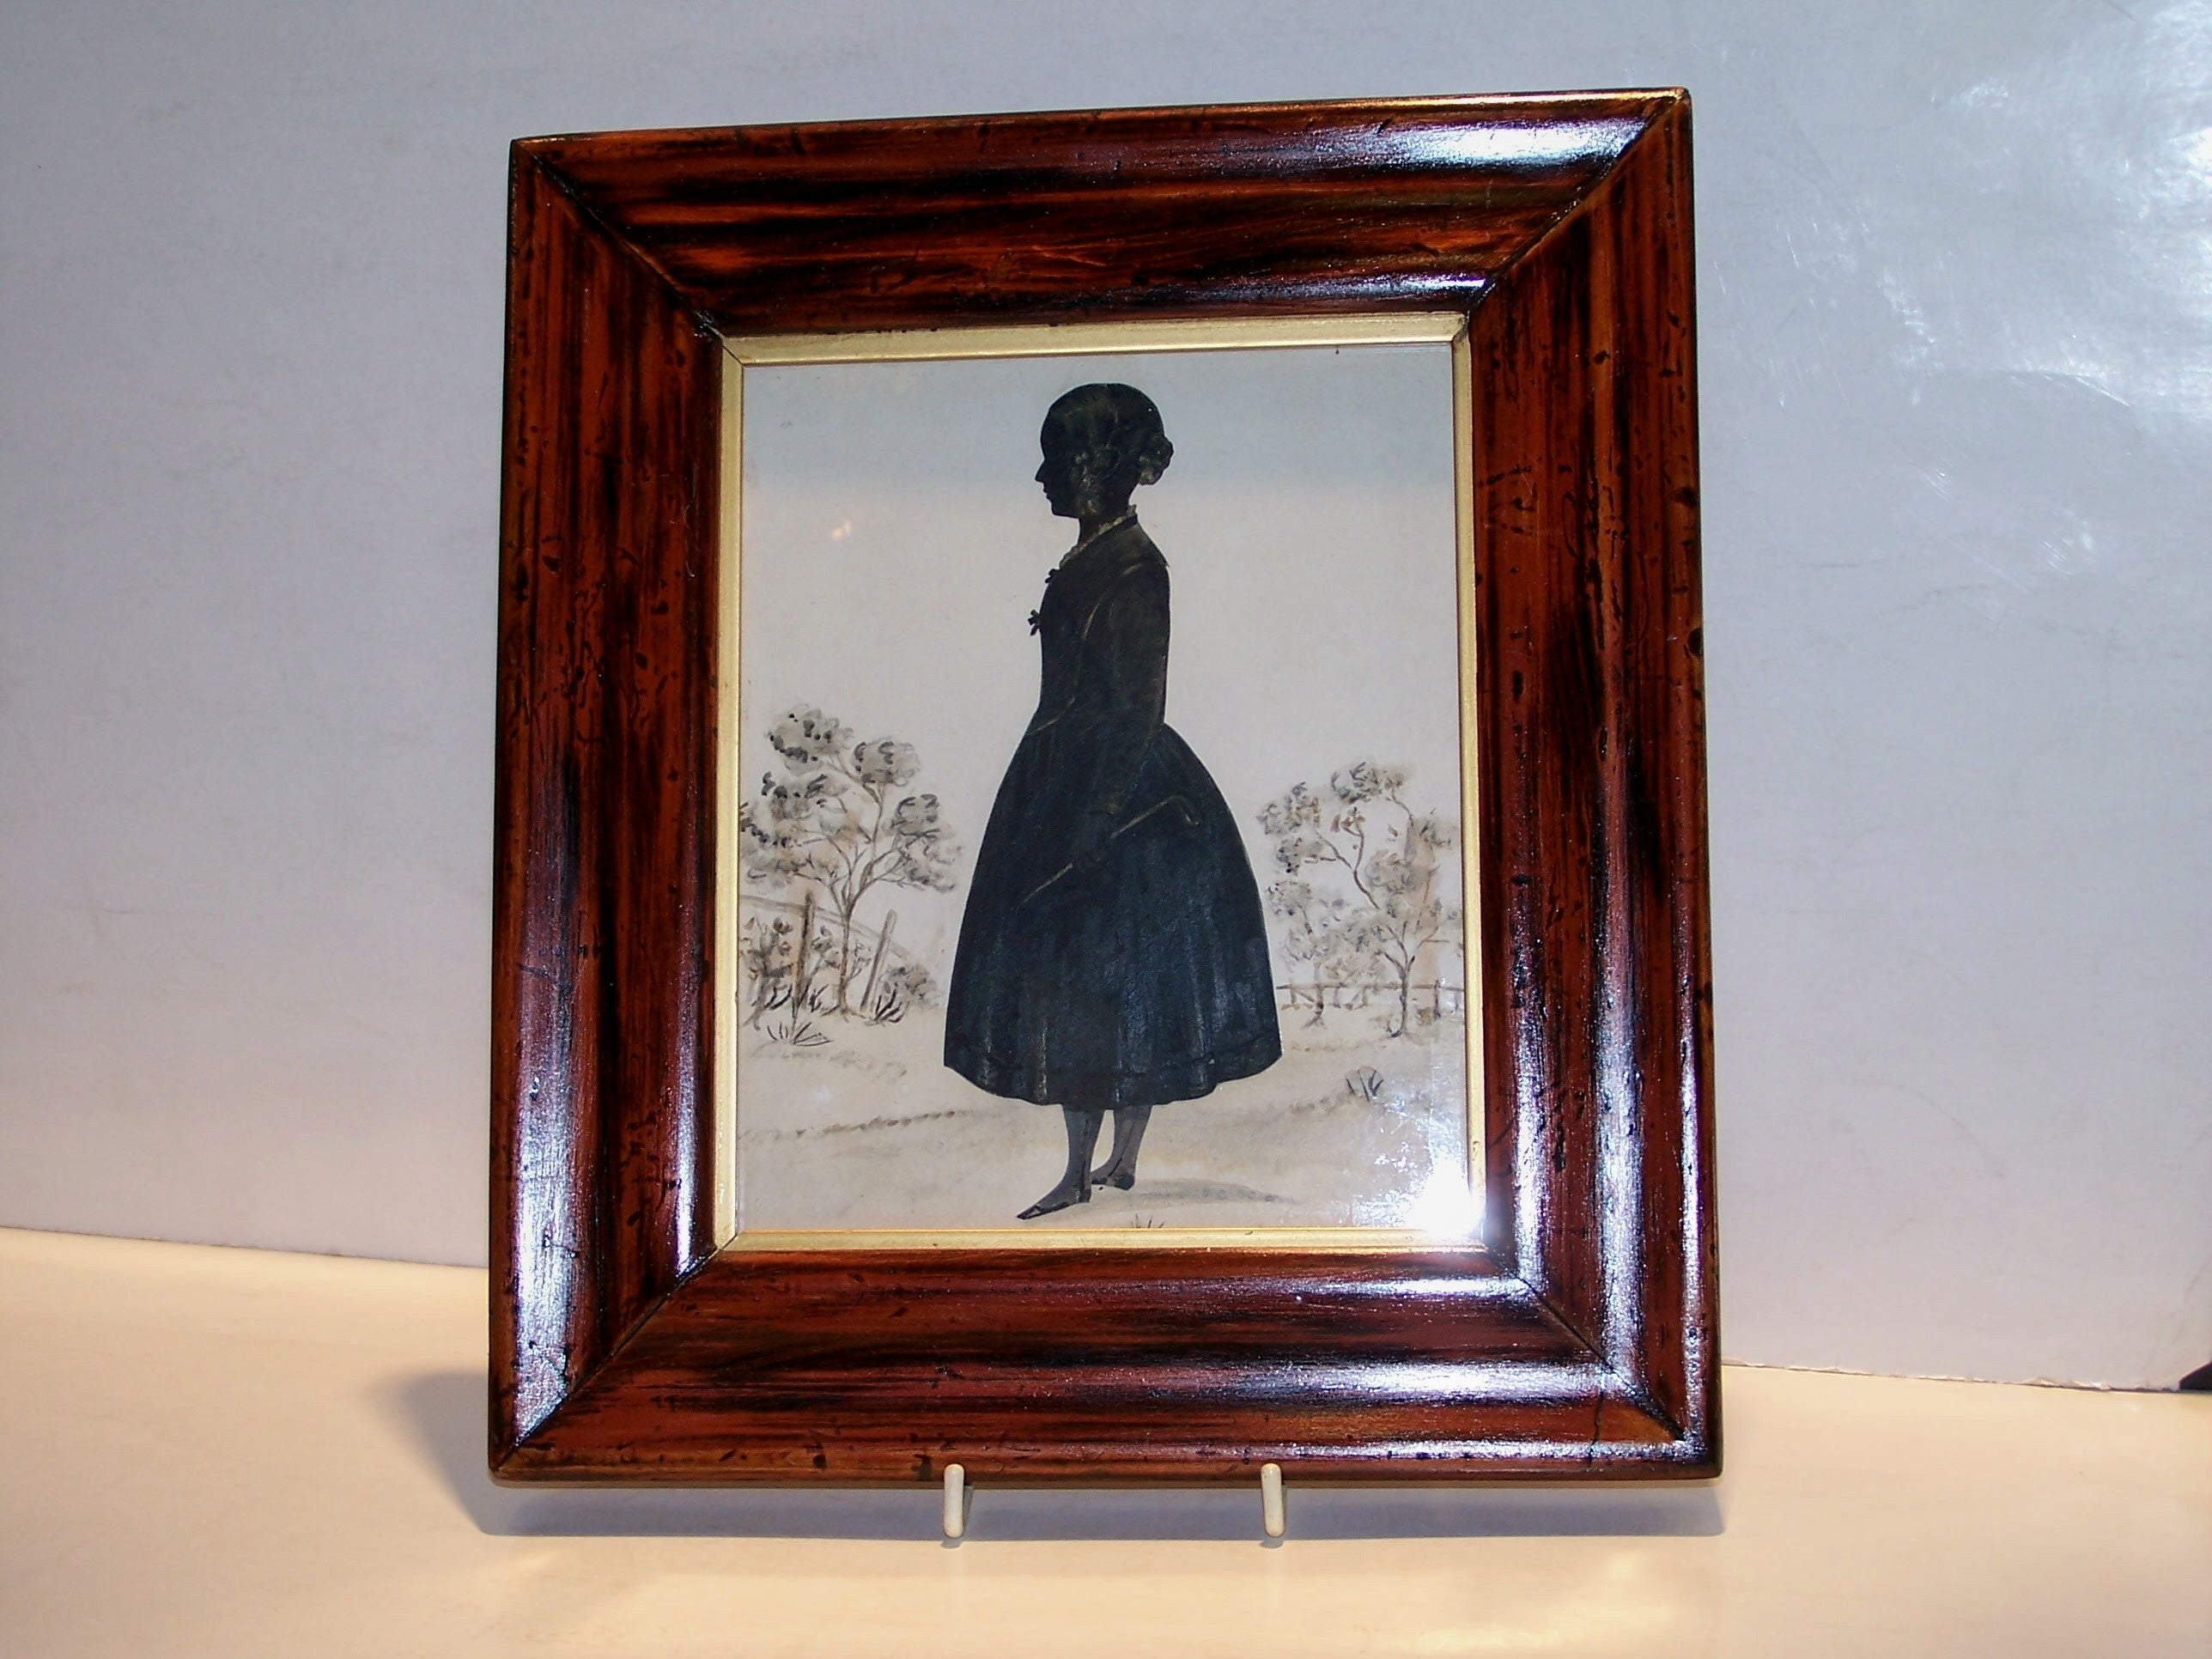 A Cut silhouette of a Young Girl